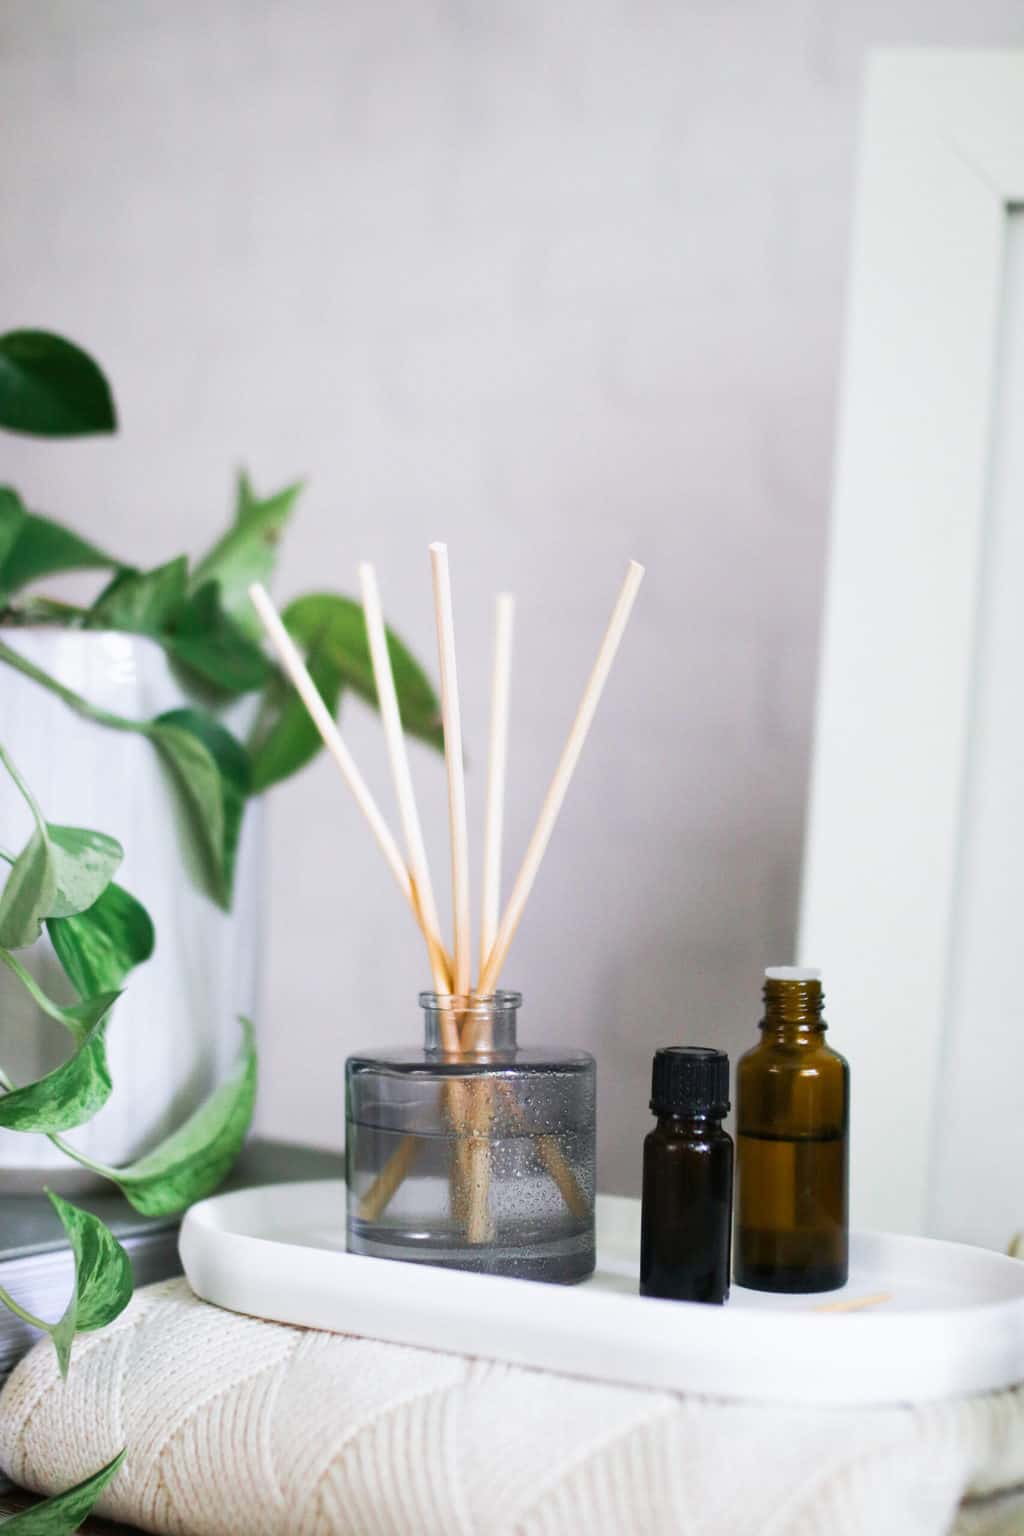 Make DIY Reed Diffusers with 5 Essential Oil Blends - Hello Glow